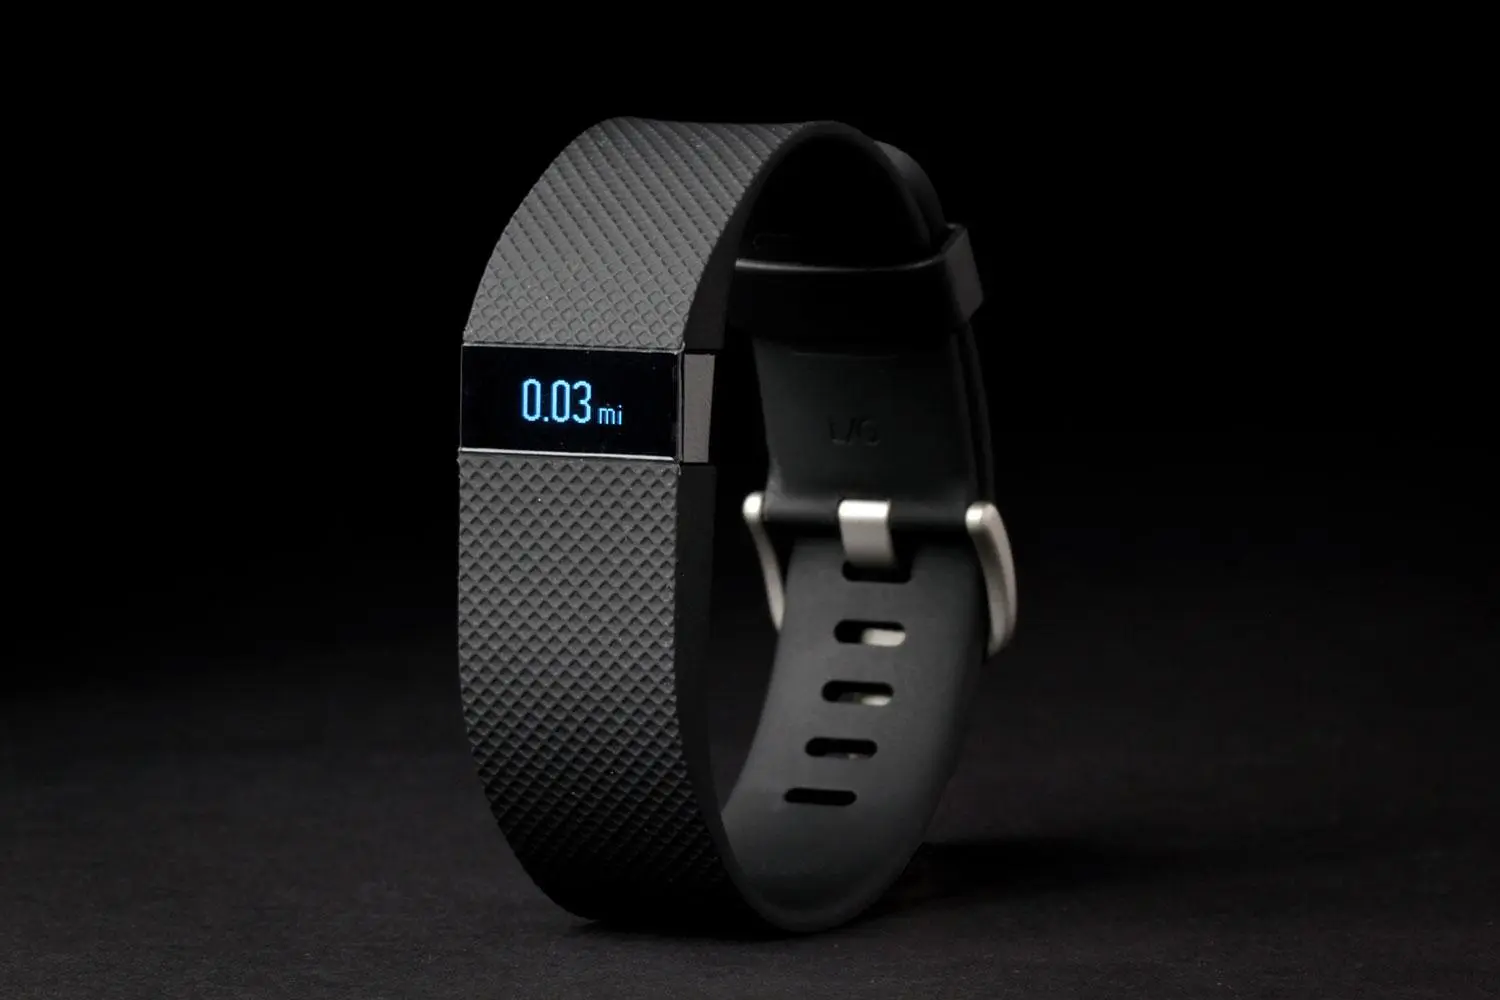 charge-hr-time-shift-adjusting-the-time-on-your-fitbit-charge-hr